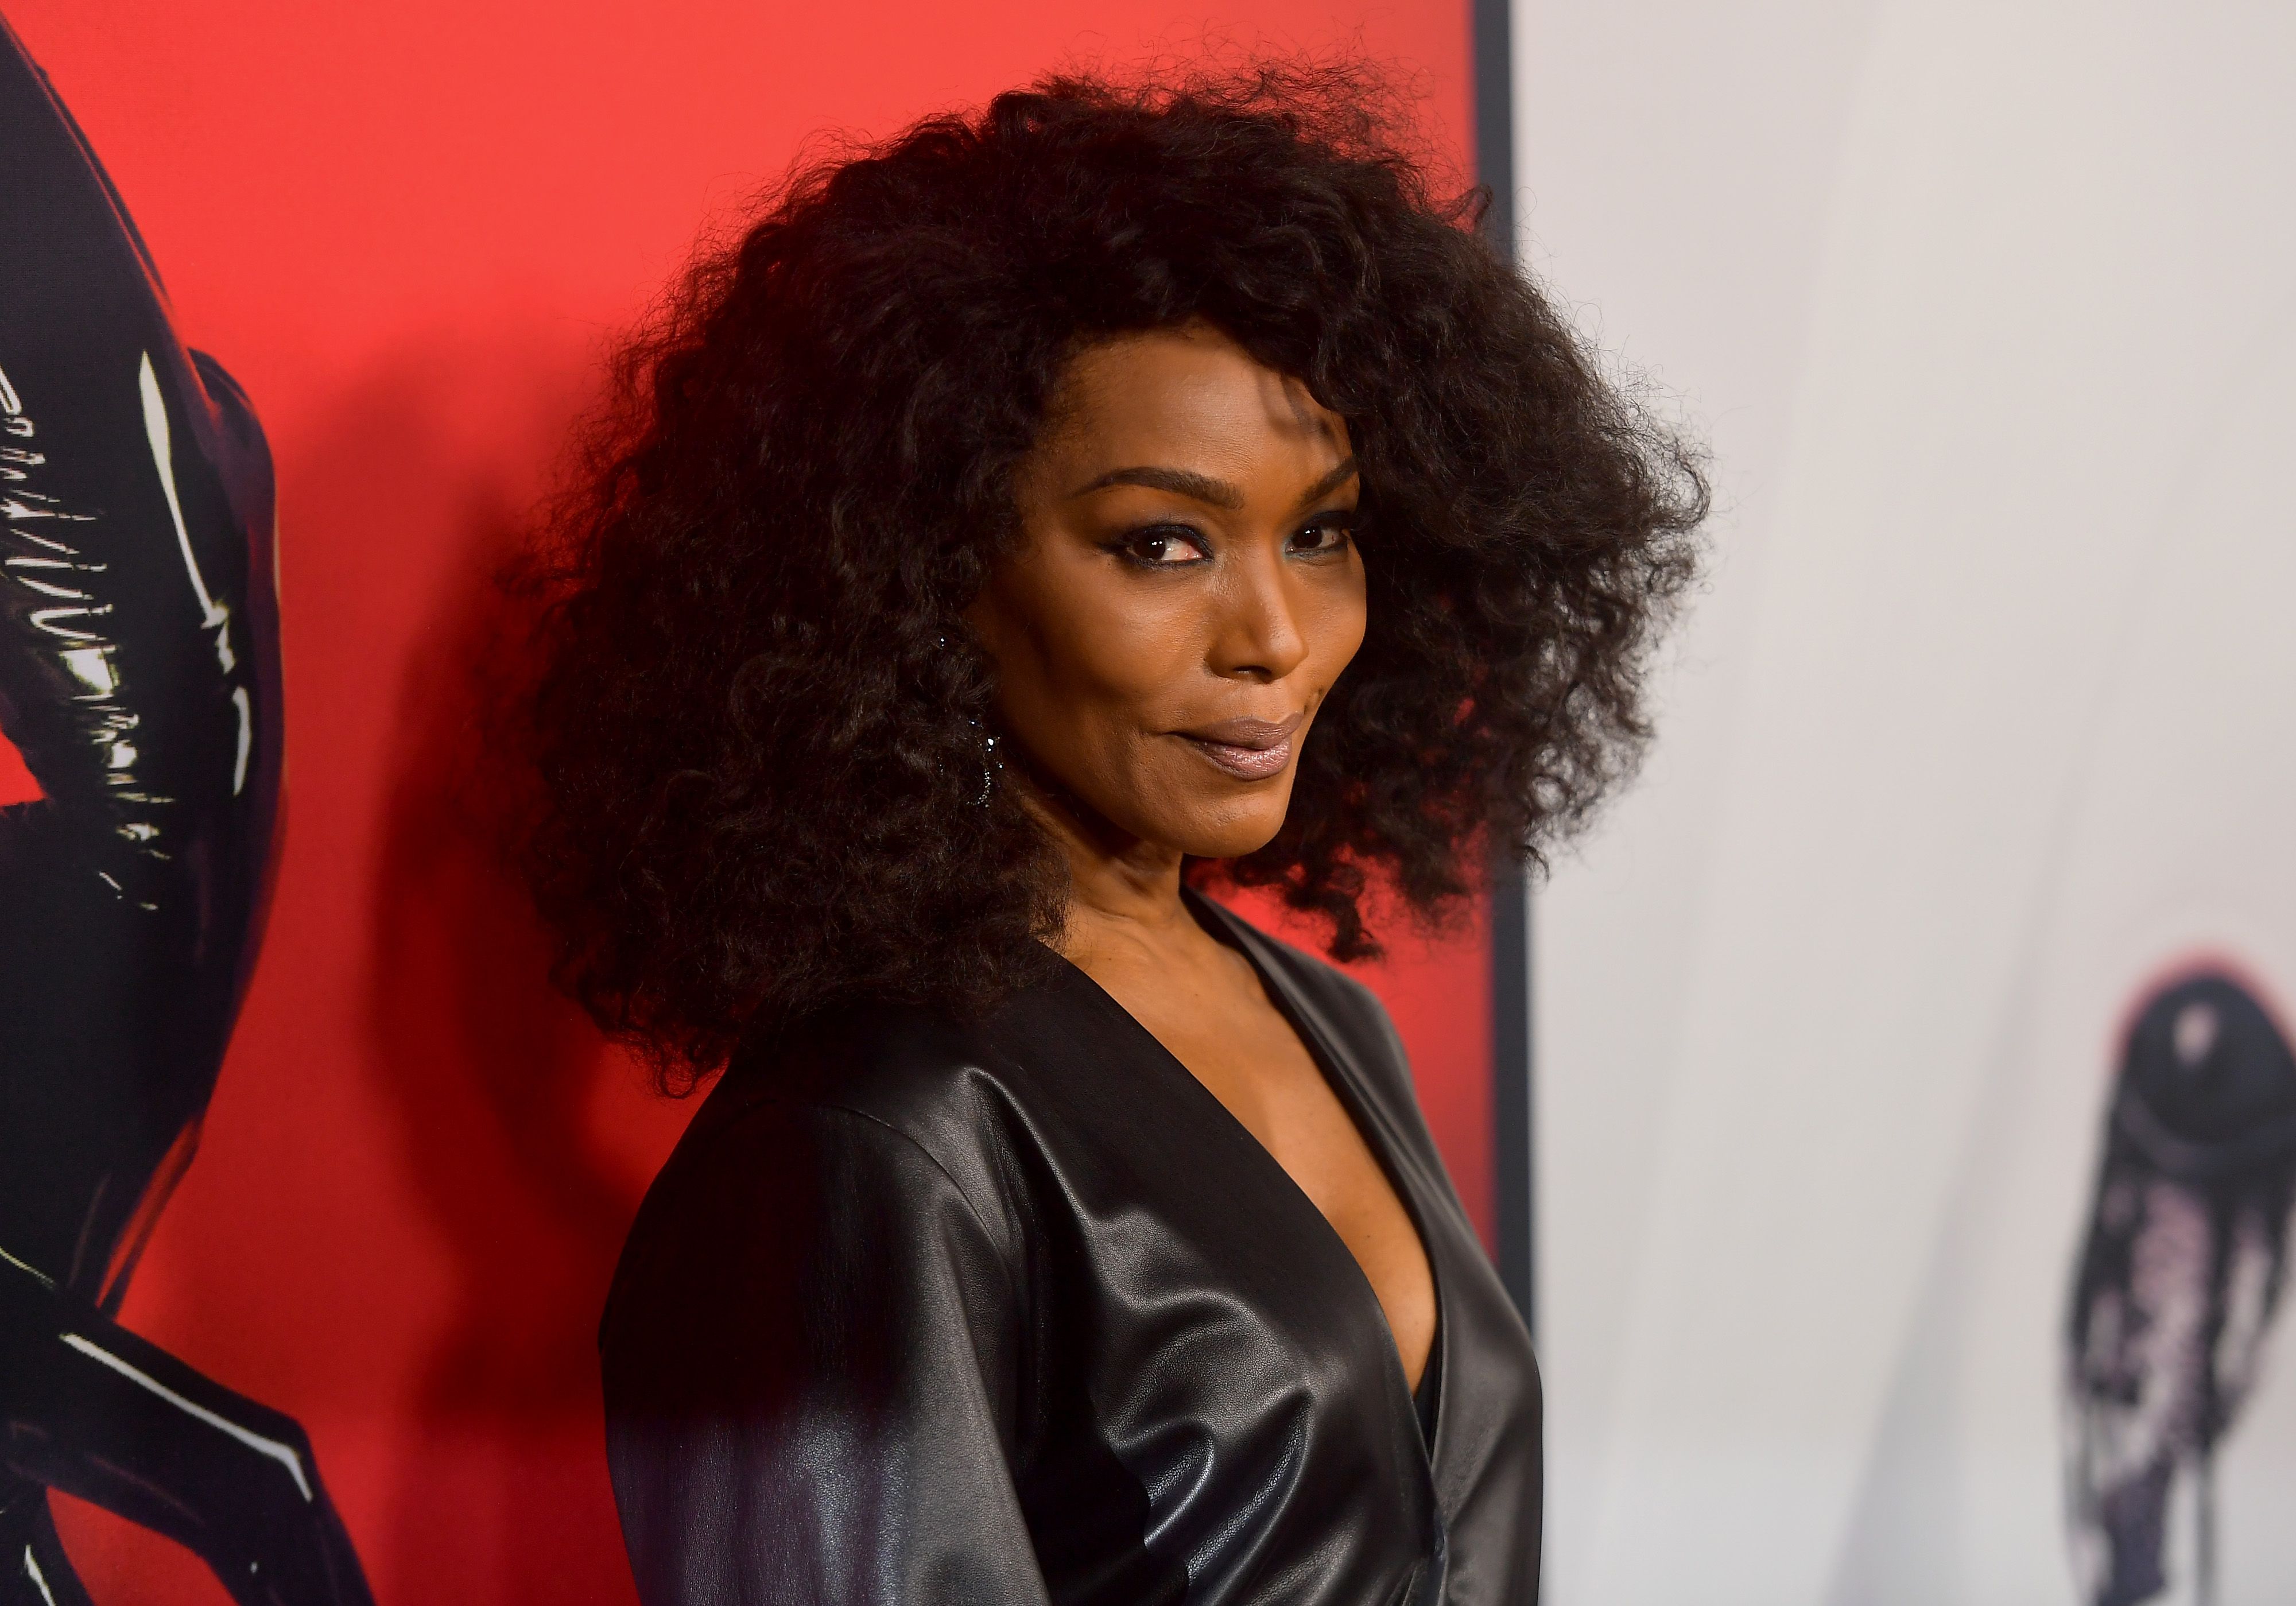 Angela Bassett at FX's "American Horror Story" 100th Episode Celebration at Hollywood Forever on October 26, 2019 | Photo: Getty Images